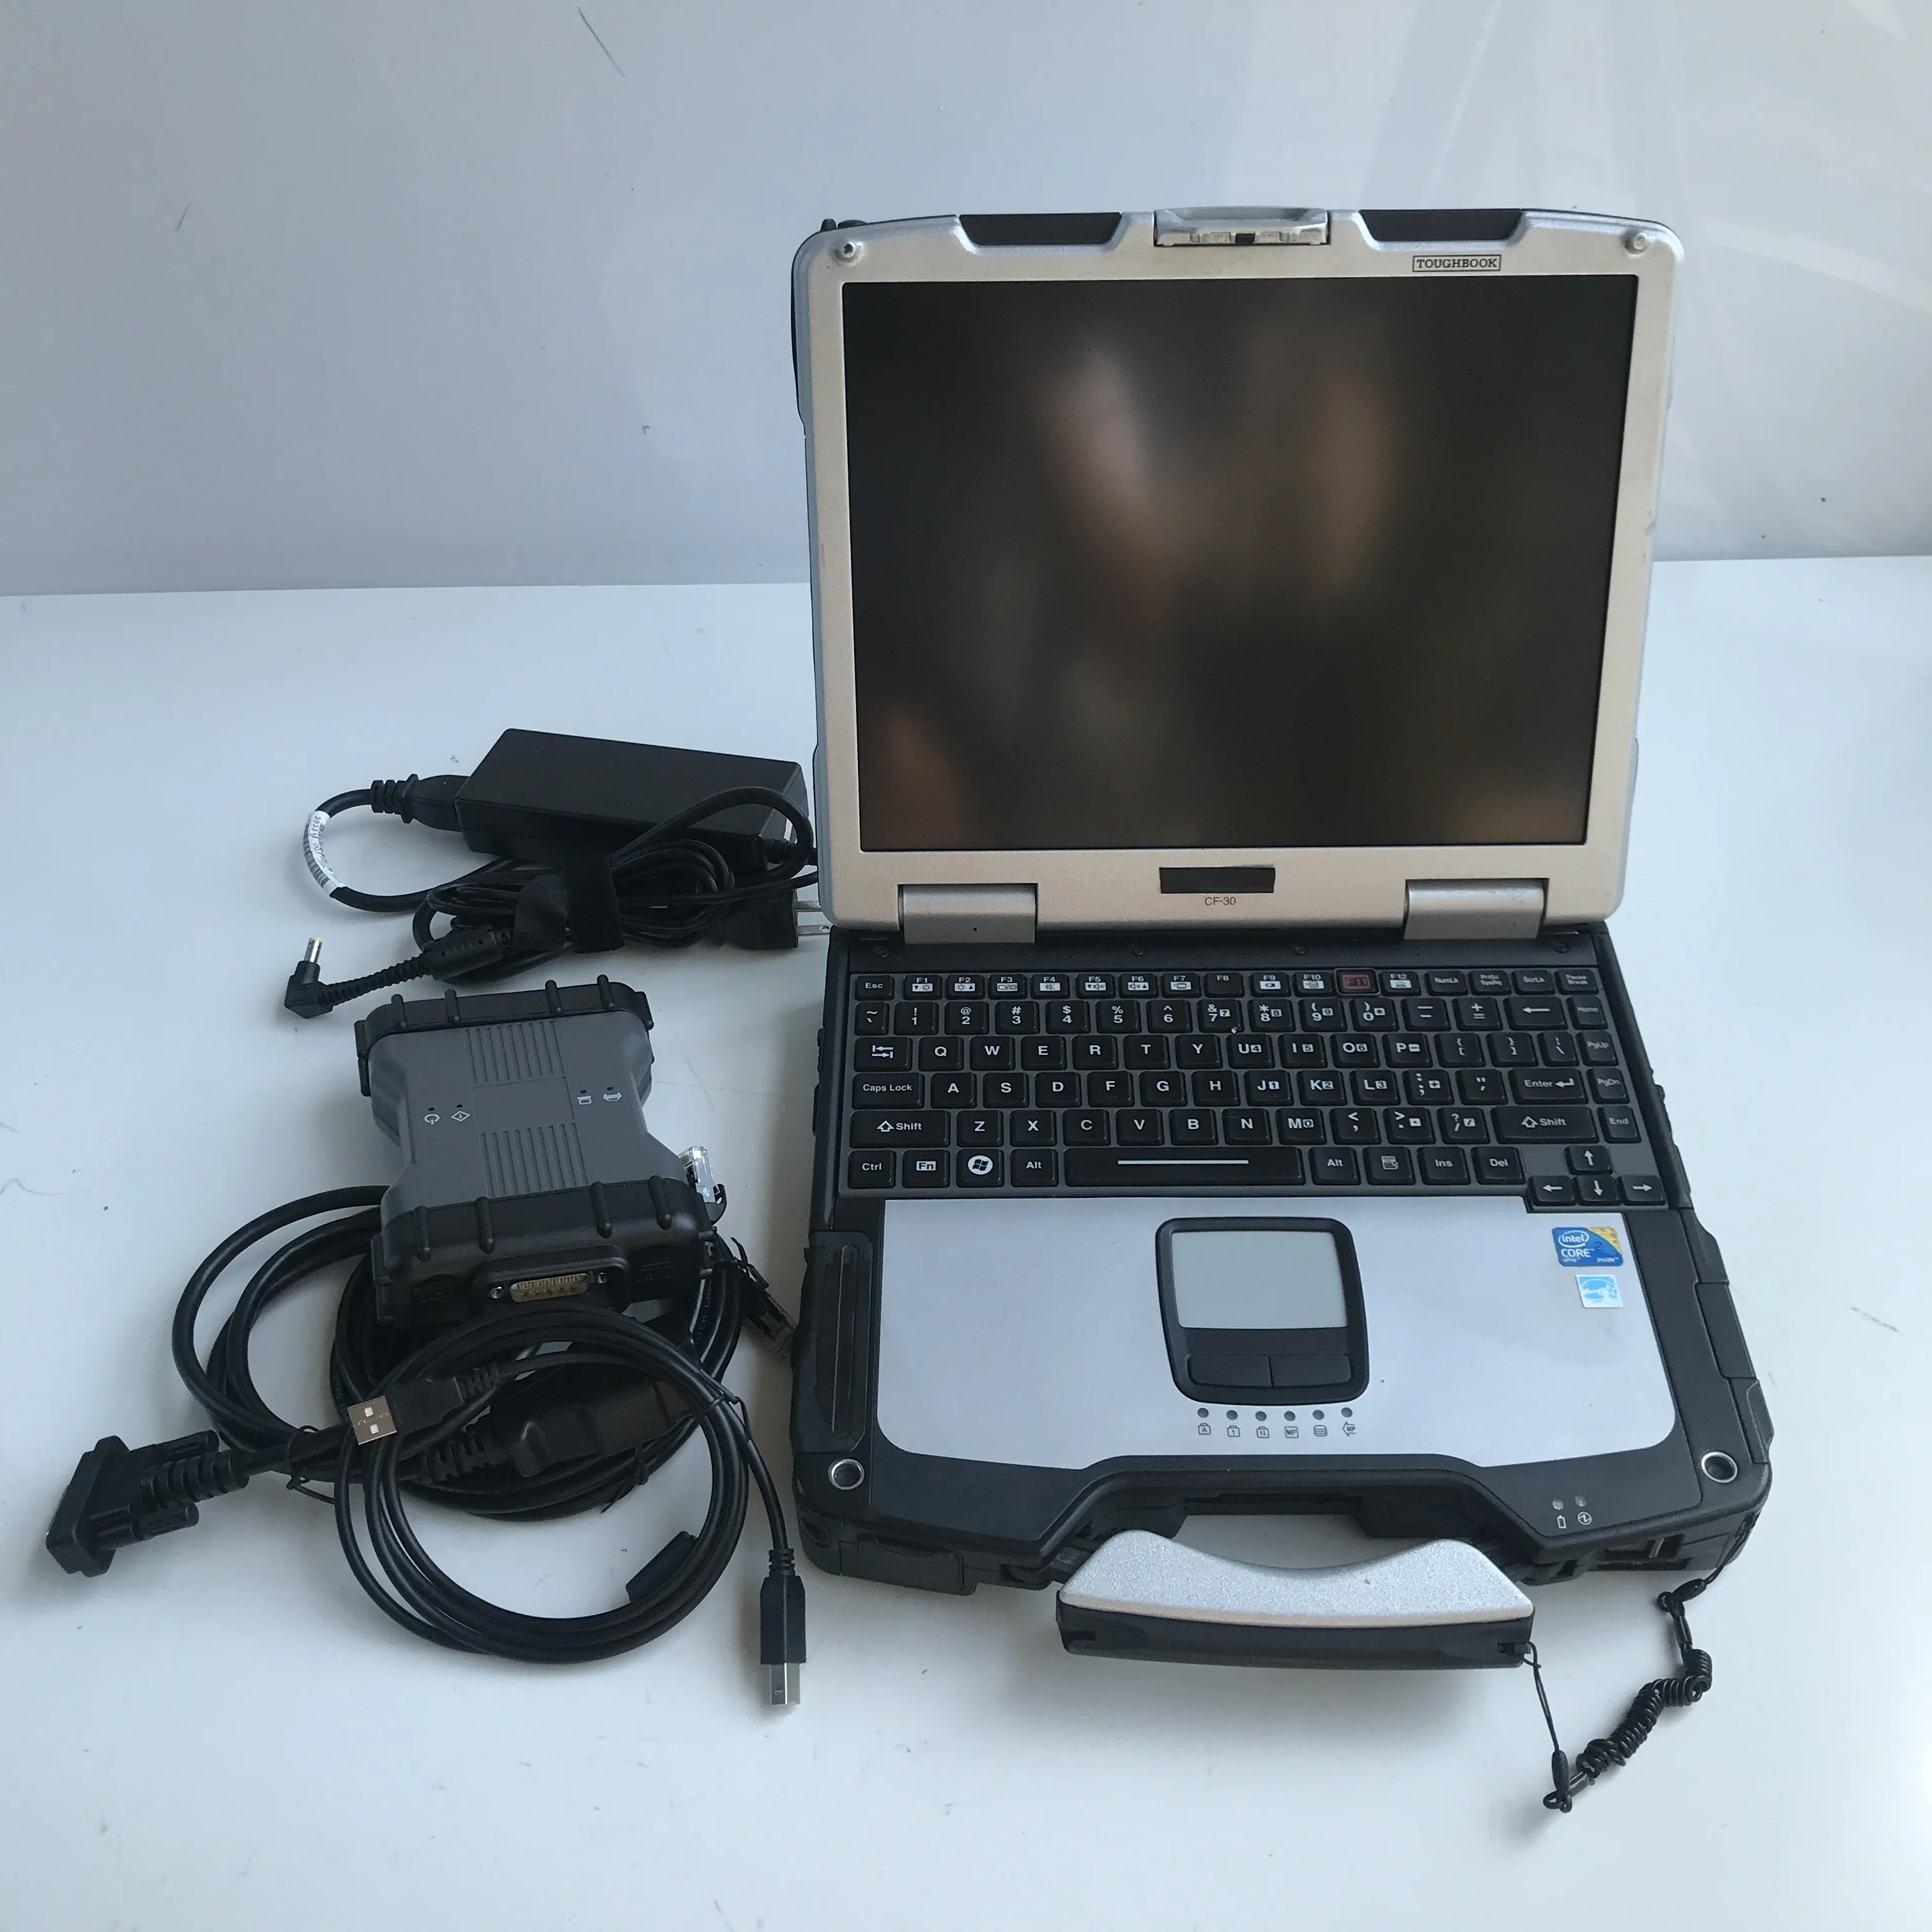 

2021.03v New Release mb star c6 DOIP/CAN xen-tr vci diagnosis tool ssd software More function than mb star c4 c5 laptop cf-30